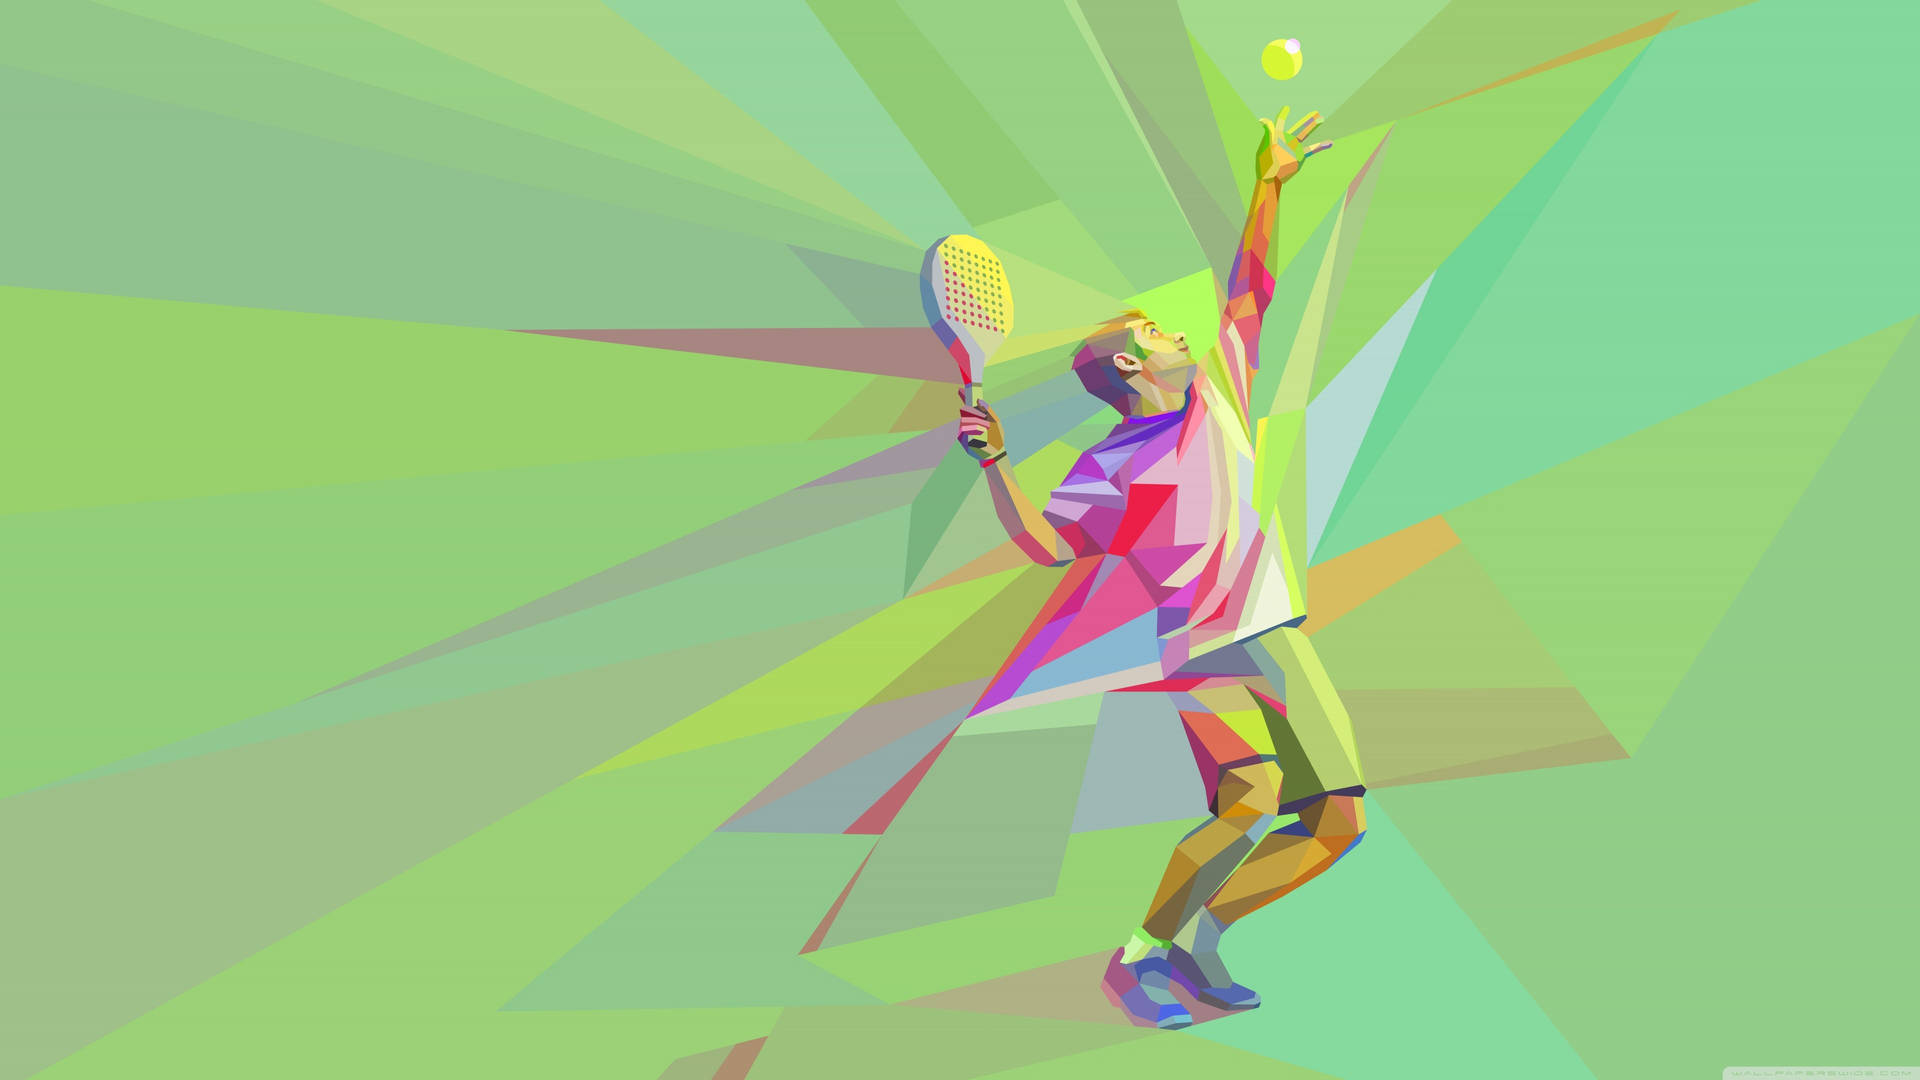 A Dynamic Illustration Of A Tennis Player In Action Background